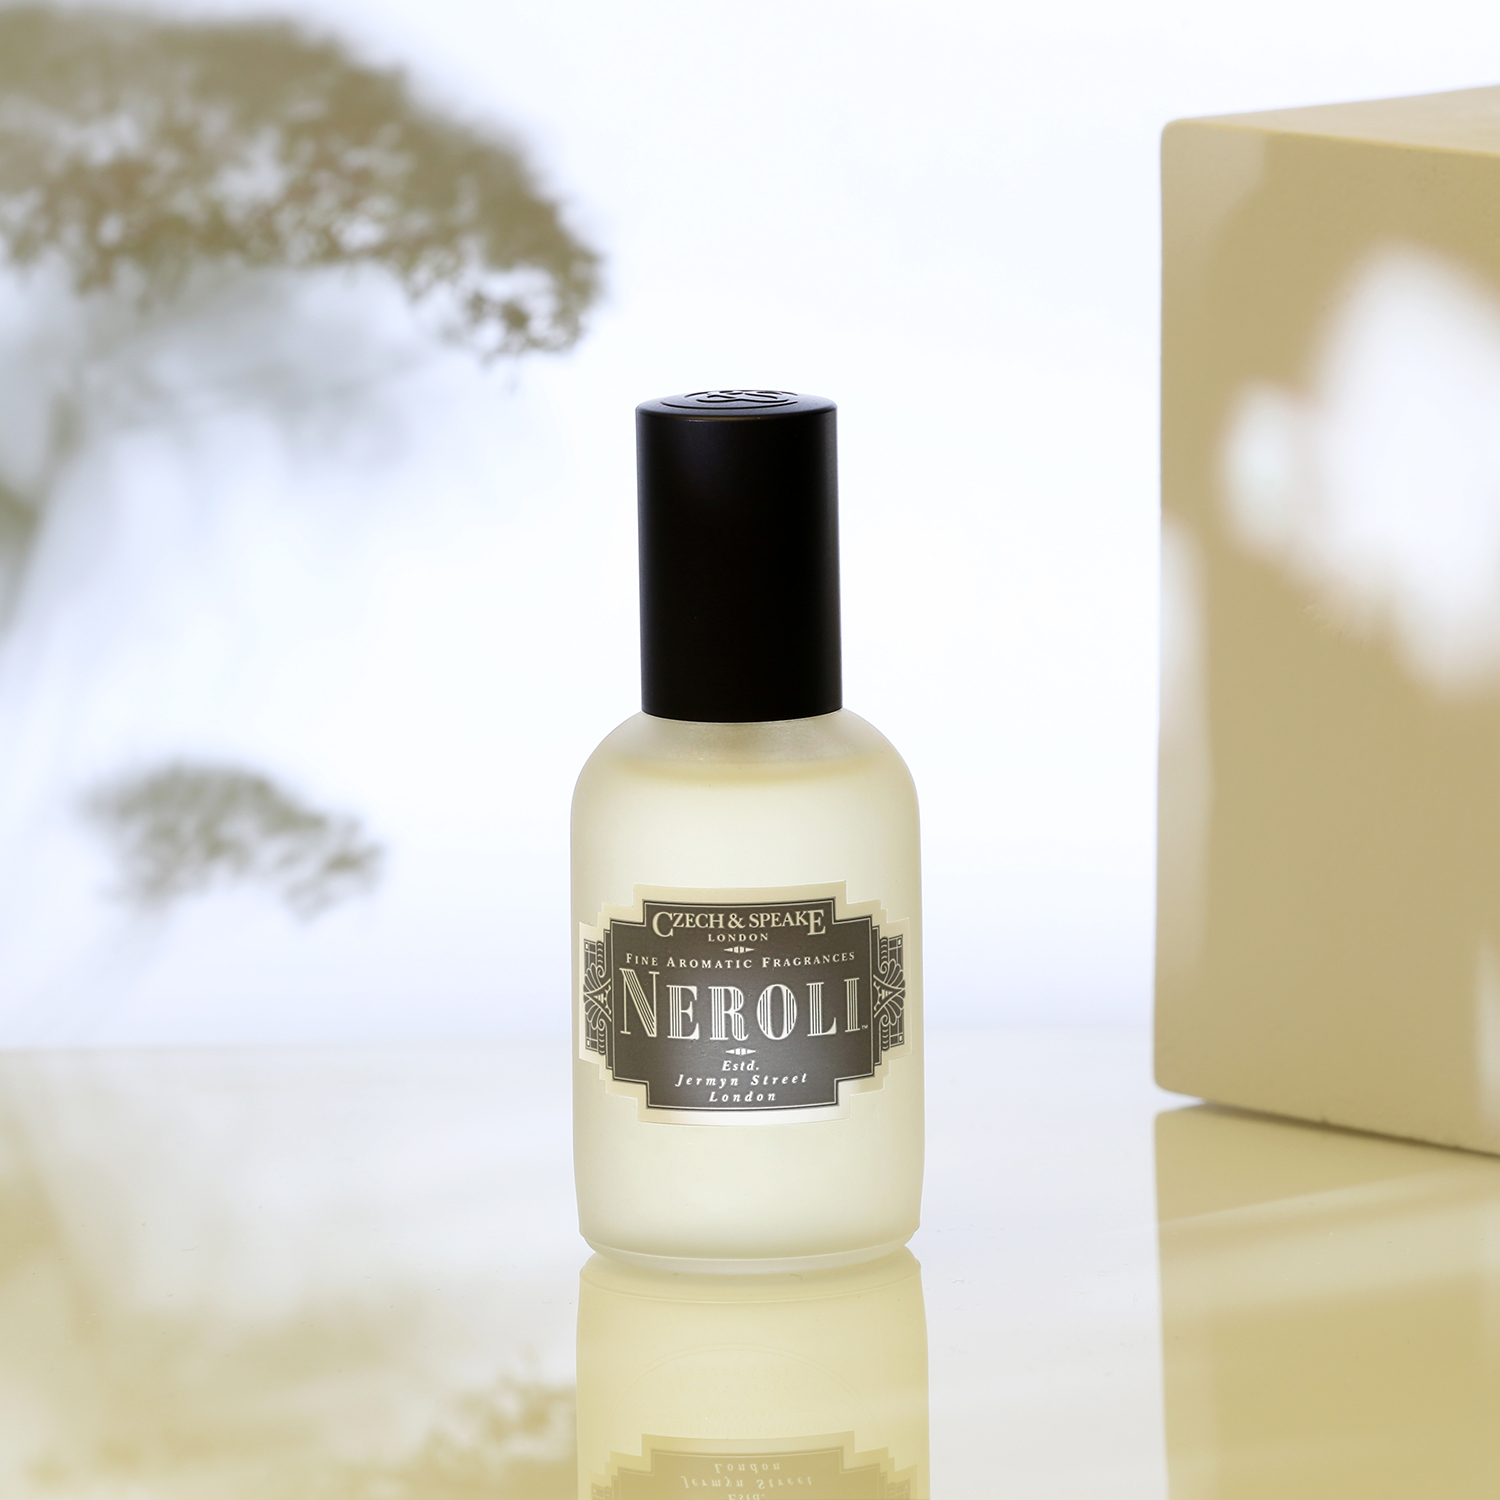 Neroli Cologne 50ml on floral background with white block